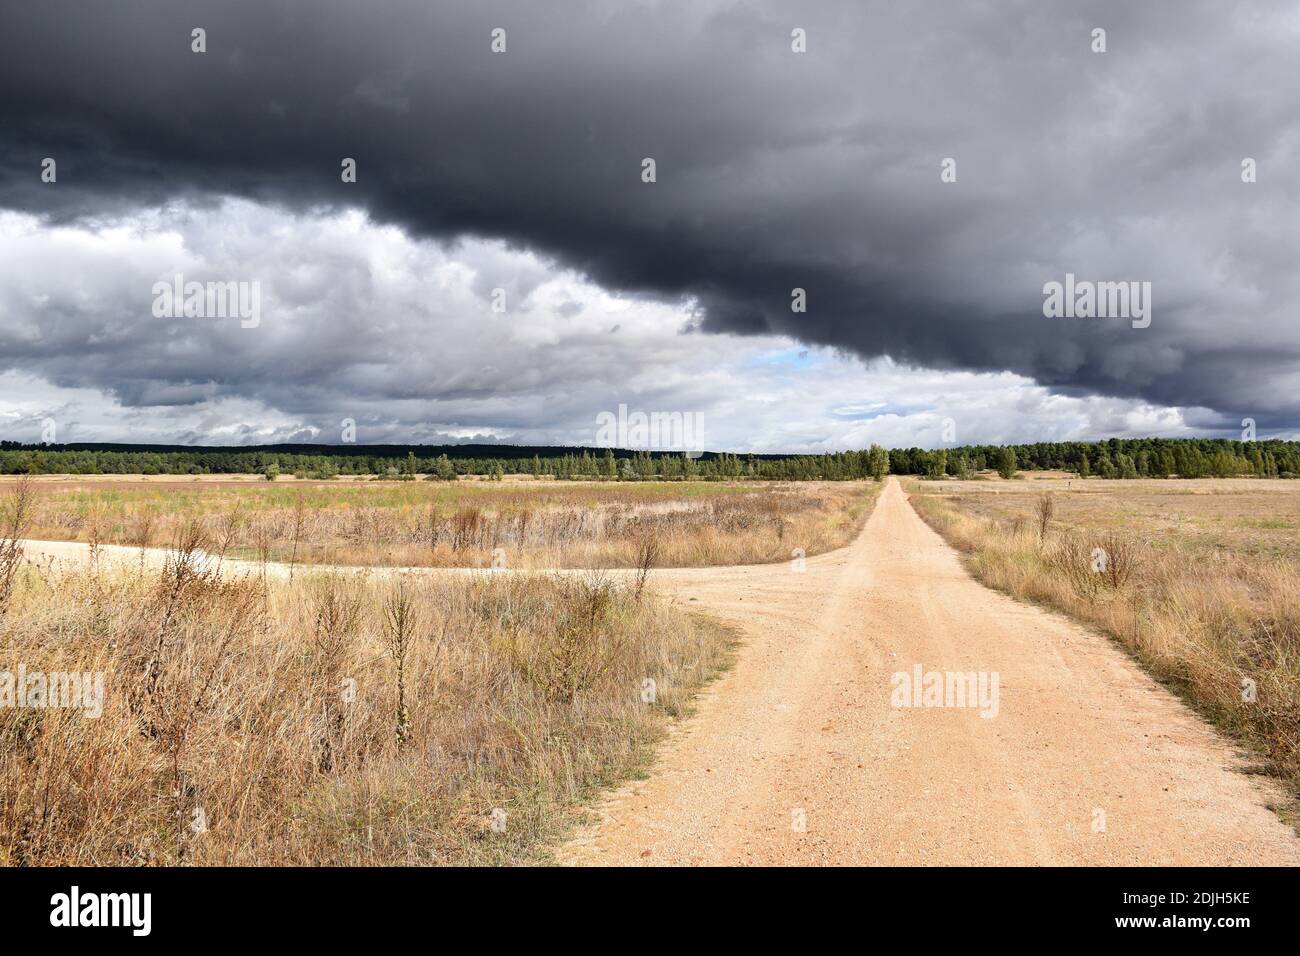 Crossroads with black clouds in the background cutting the sky. Stock Photo